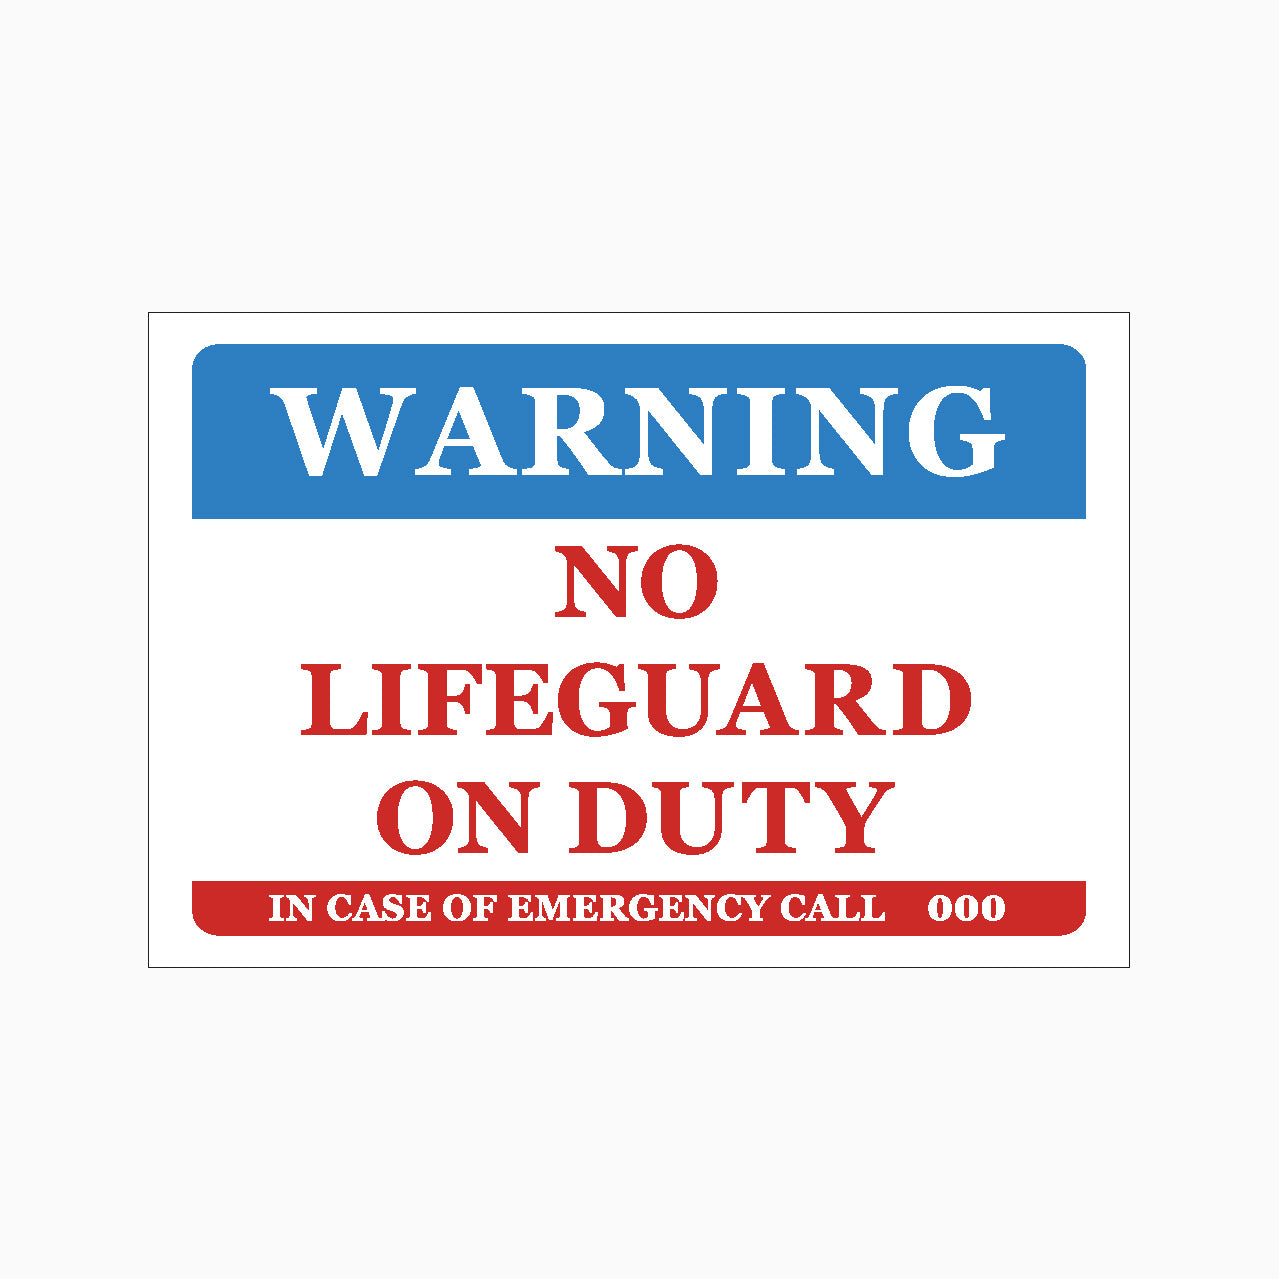 NO LIFEGUARD ON DUTY SIGN - IN CASE OF EMERGENCY CALL 000 SIGN